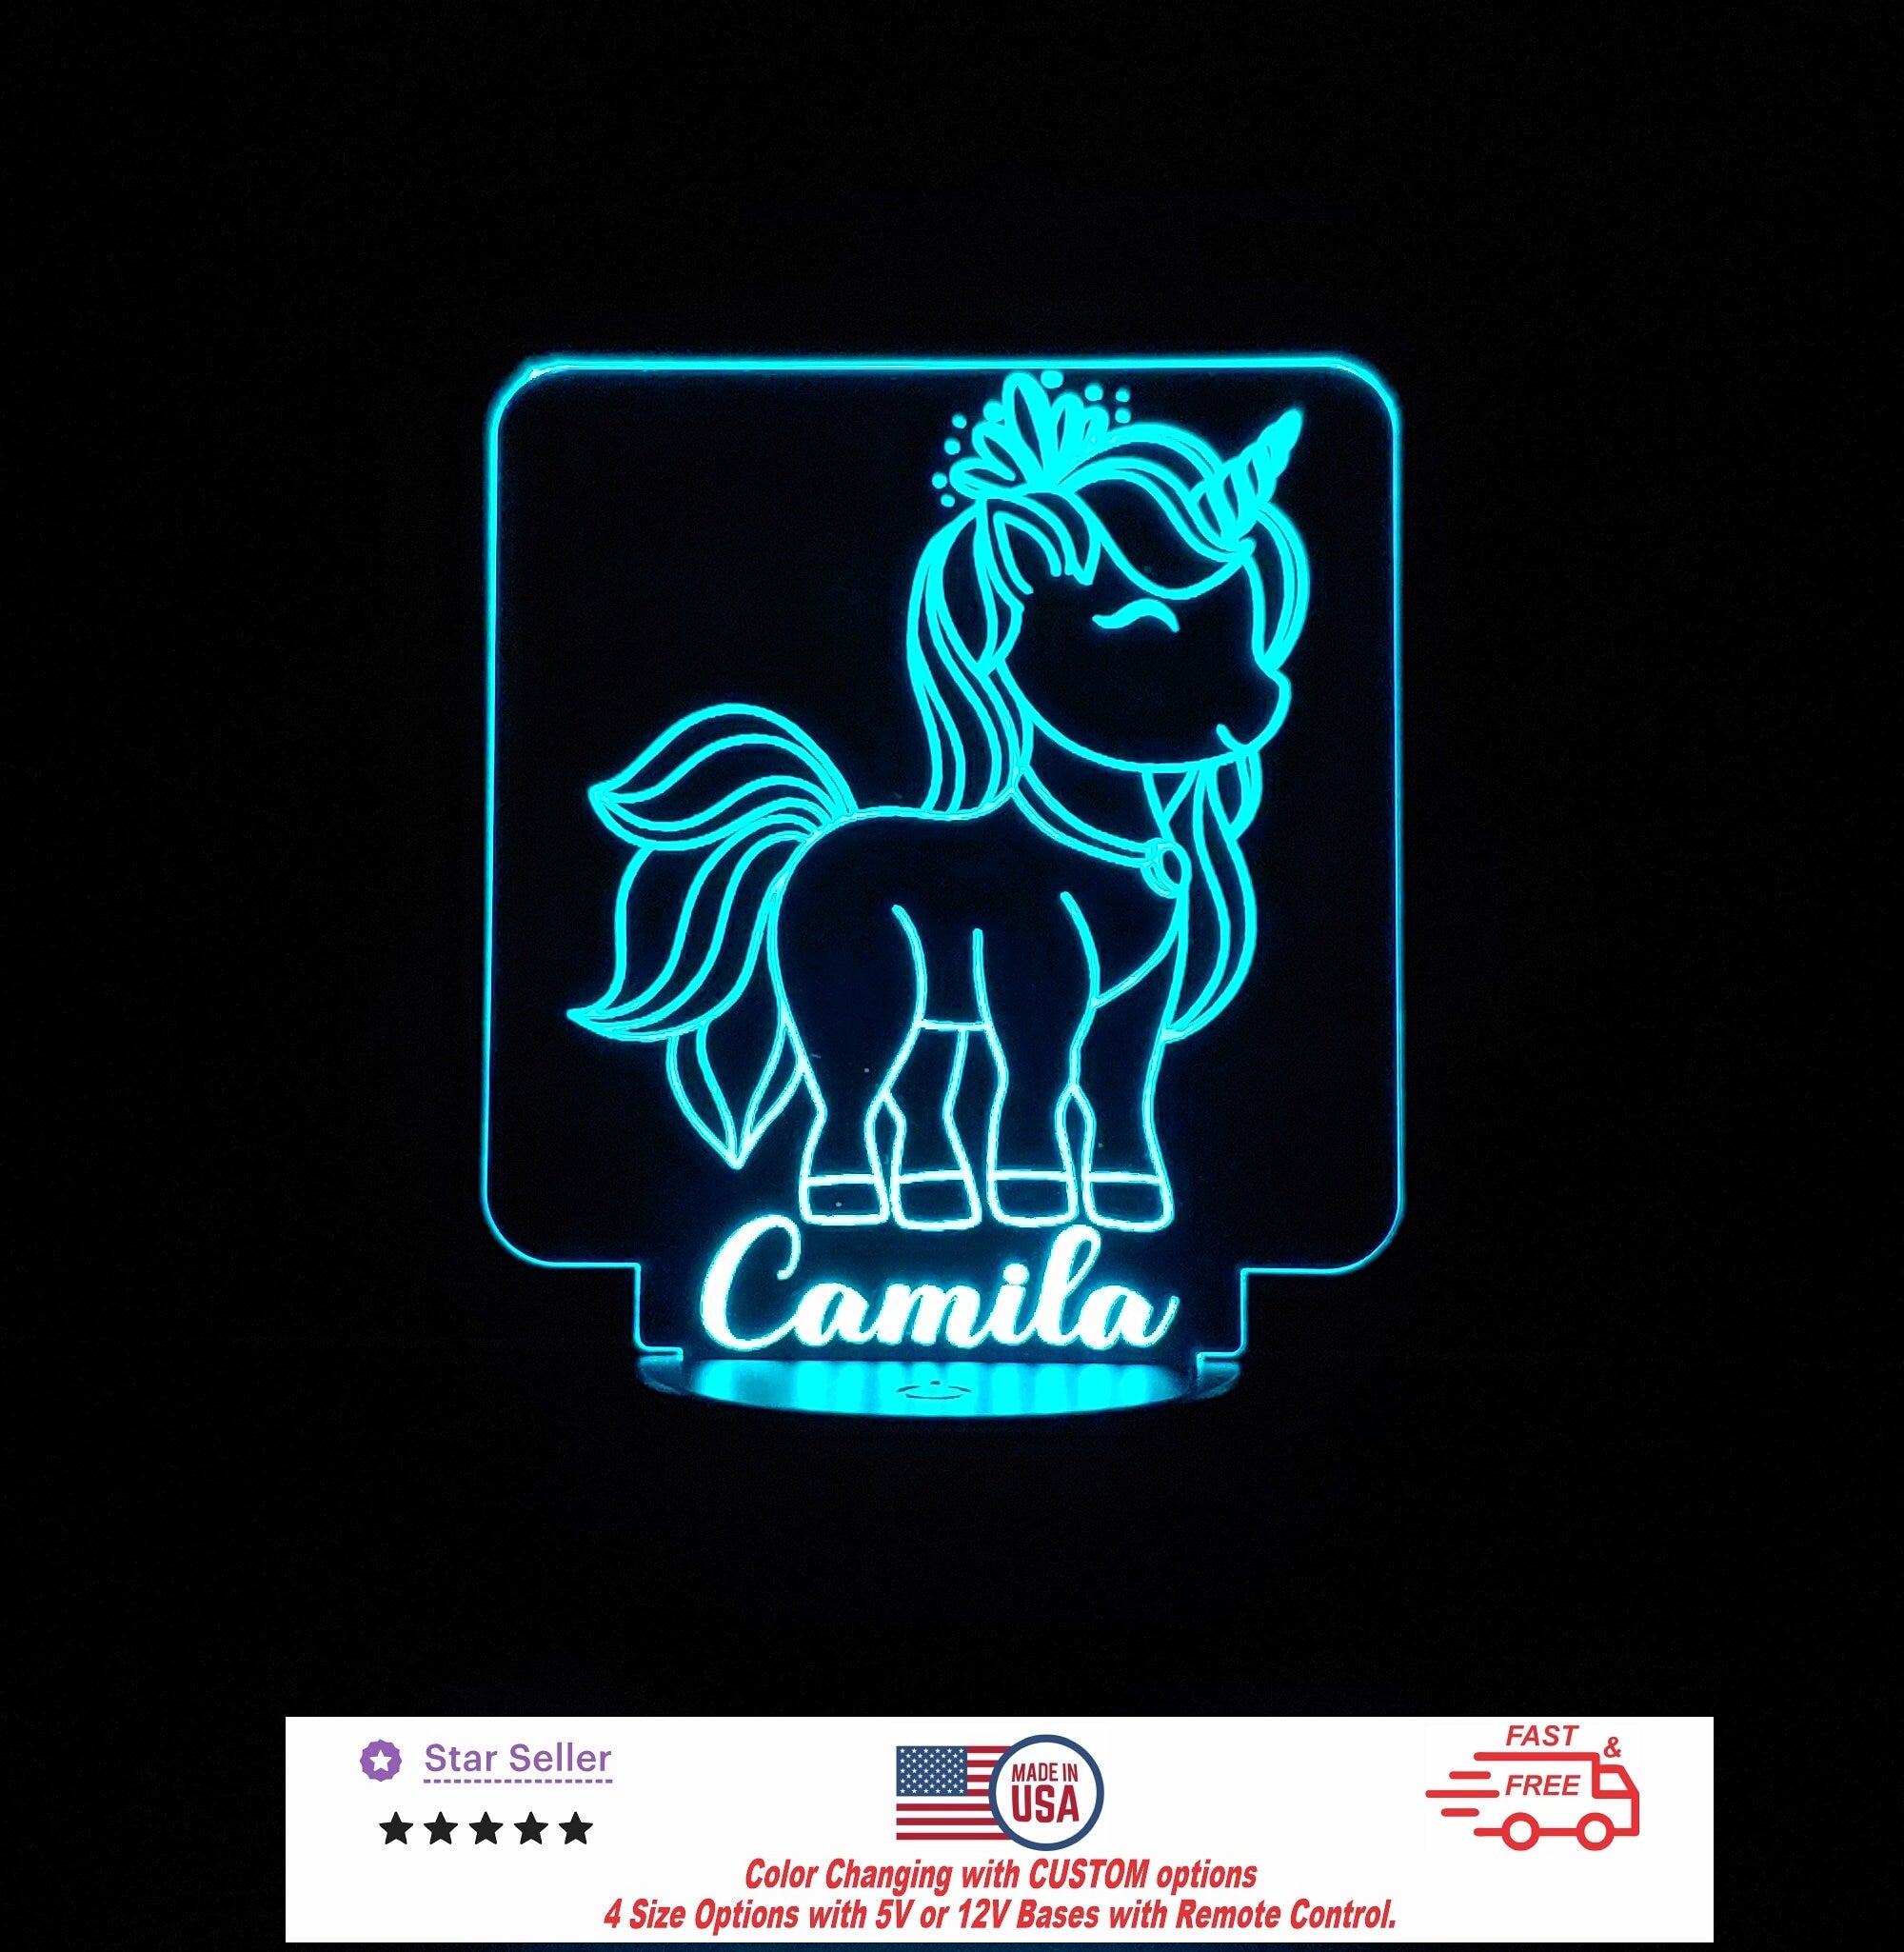 Custom Baby Unicorn Personalized LED Night Light - Neon sign, Room Decor, Party Enhancer, Nursery, Kids' Room, Free Shipping Made in USA